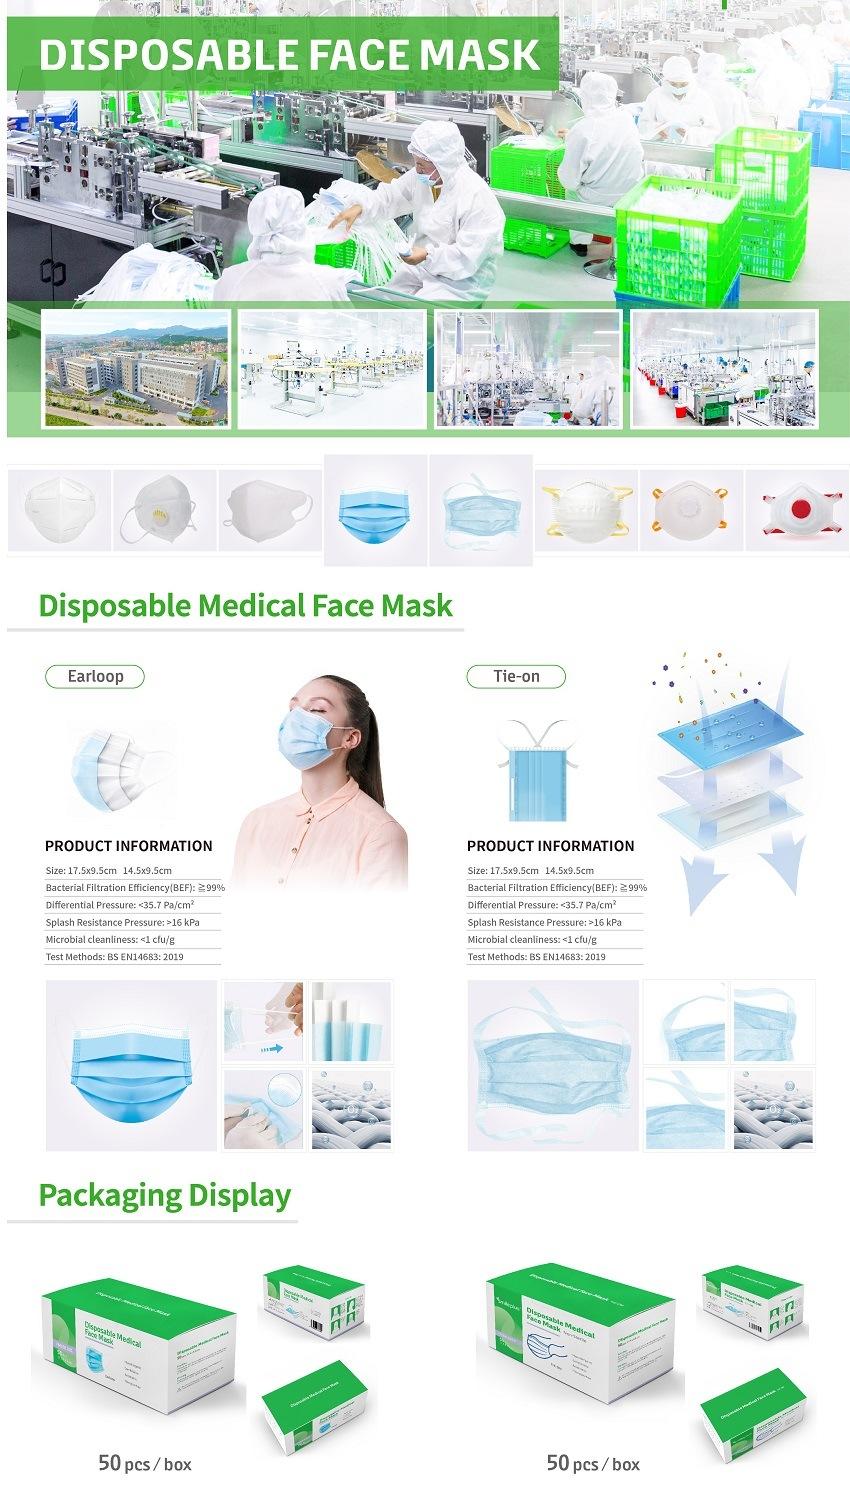 Low Price Protection Face Mask, High Filtration and Ventilation Security with Valve